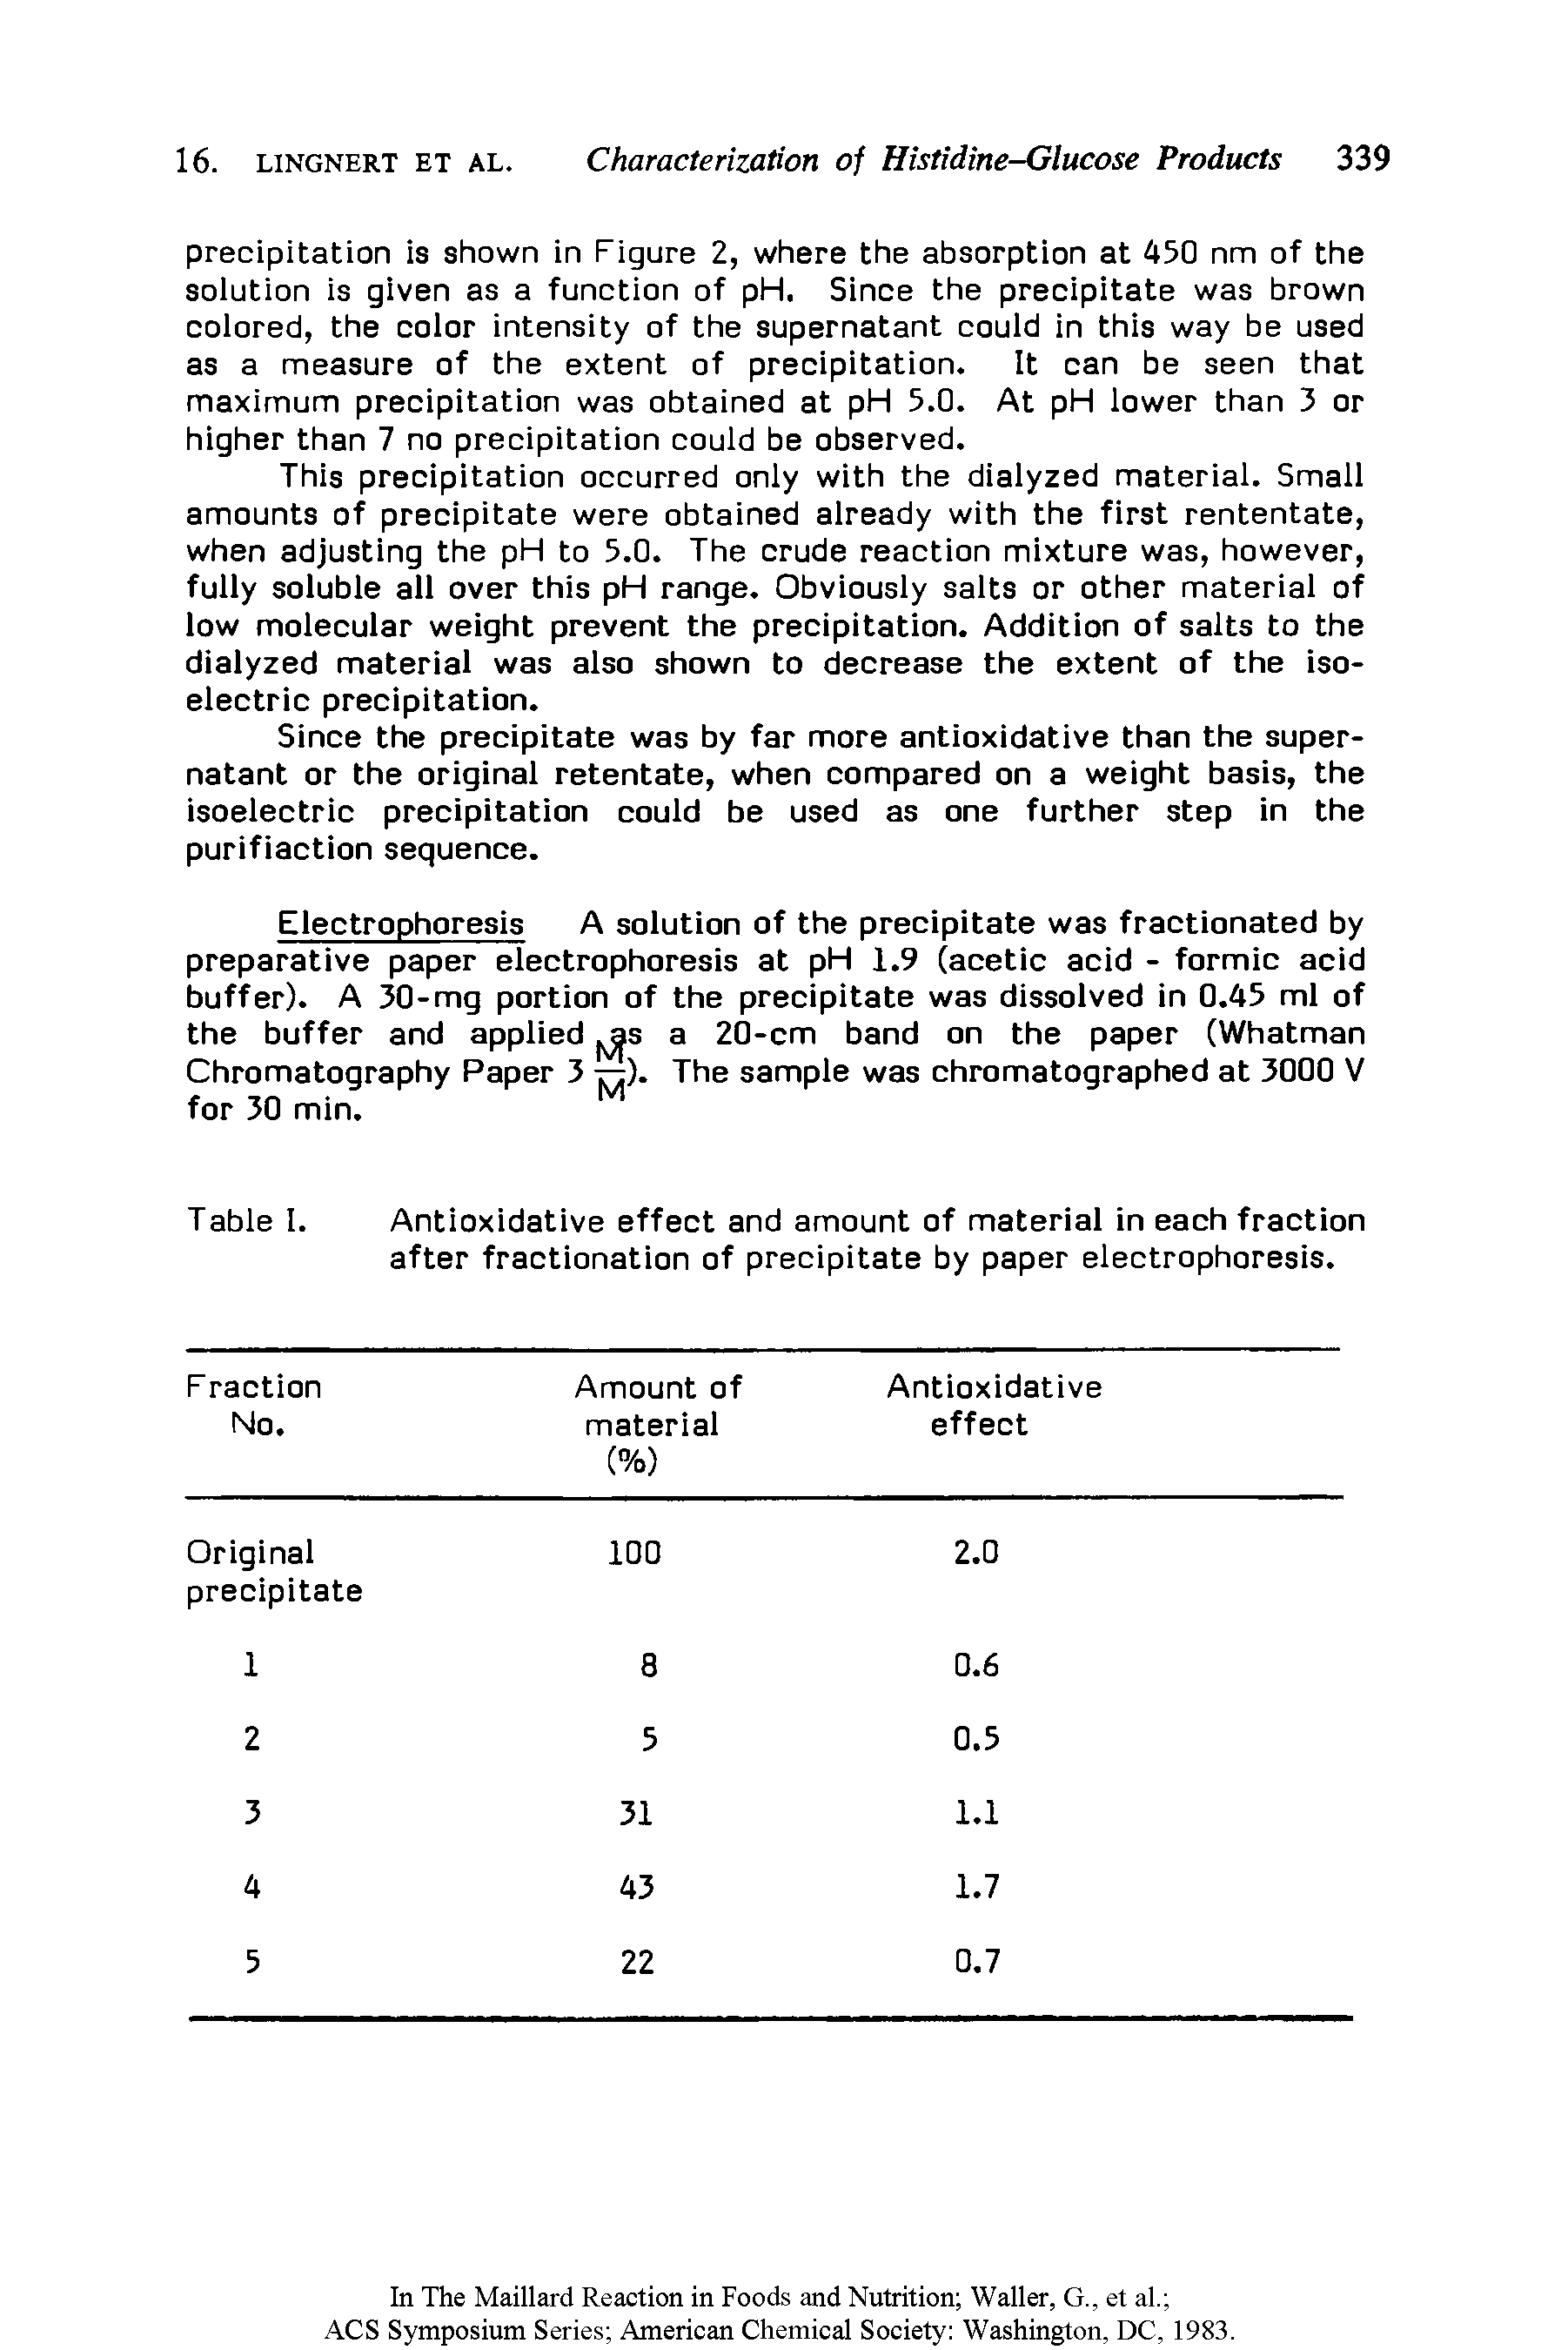 Table I. Antioxidative effect and amount of material in each fraction after fractionation of precipitate by paper electrophoresis.